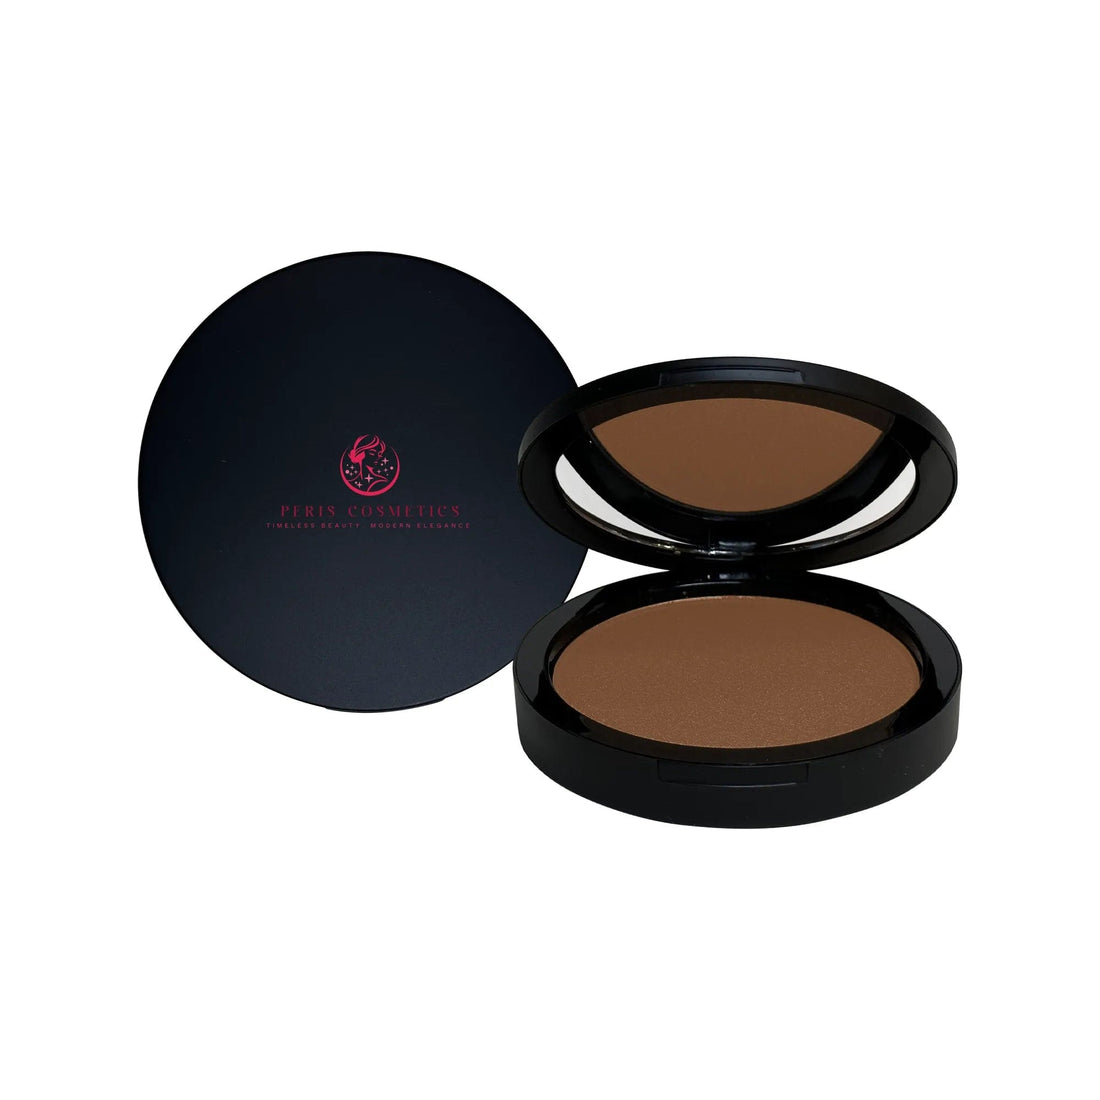 Peris Cosmetics Vegan Mocha Bronzer: Silky Texture for All Skin Types | Red and Brown Tone Kylie Cosmetics Amazon